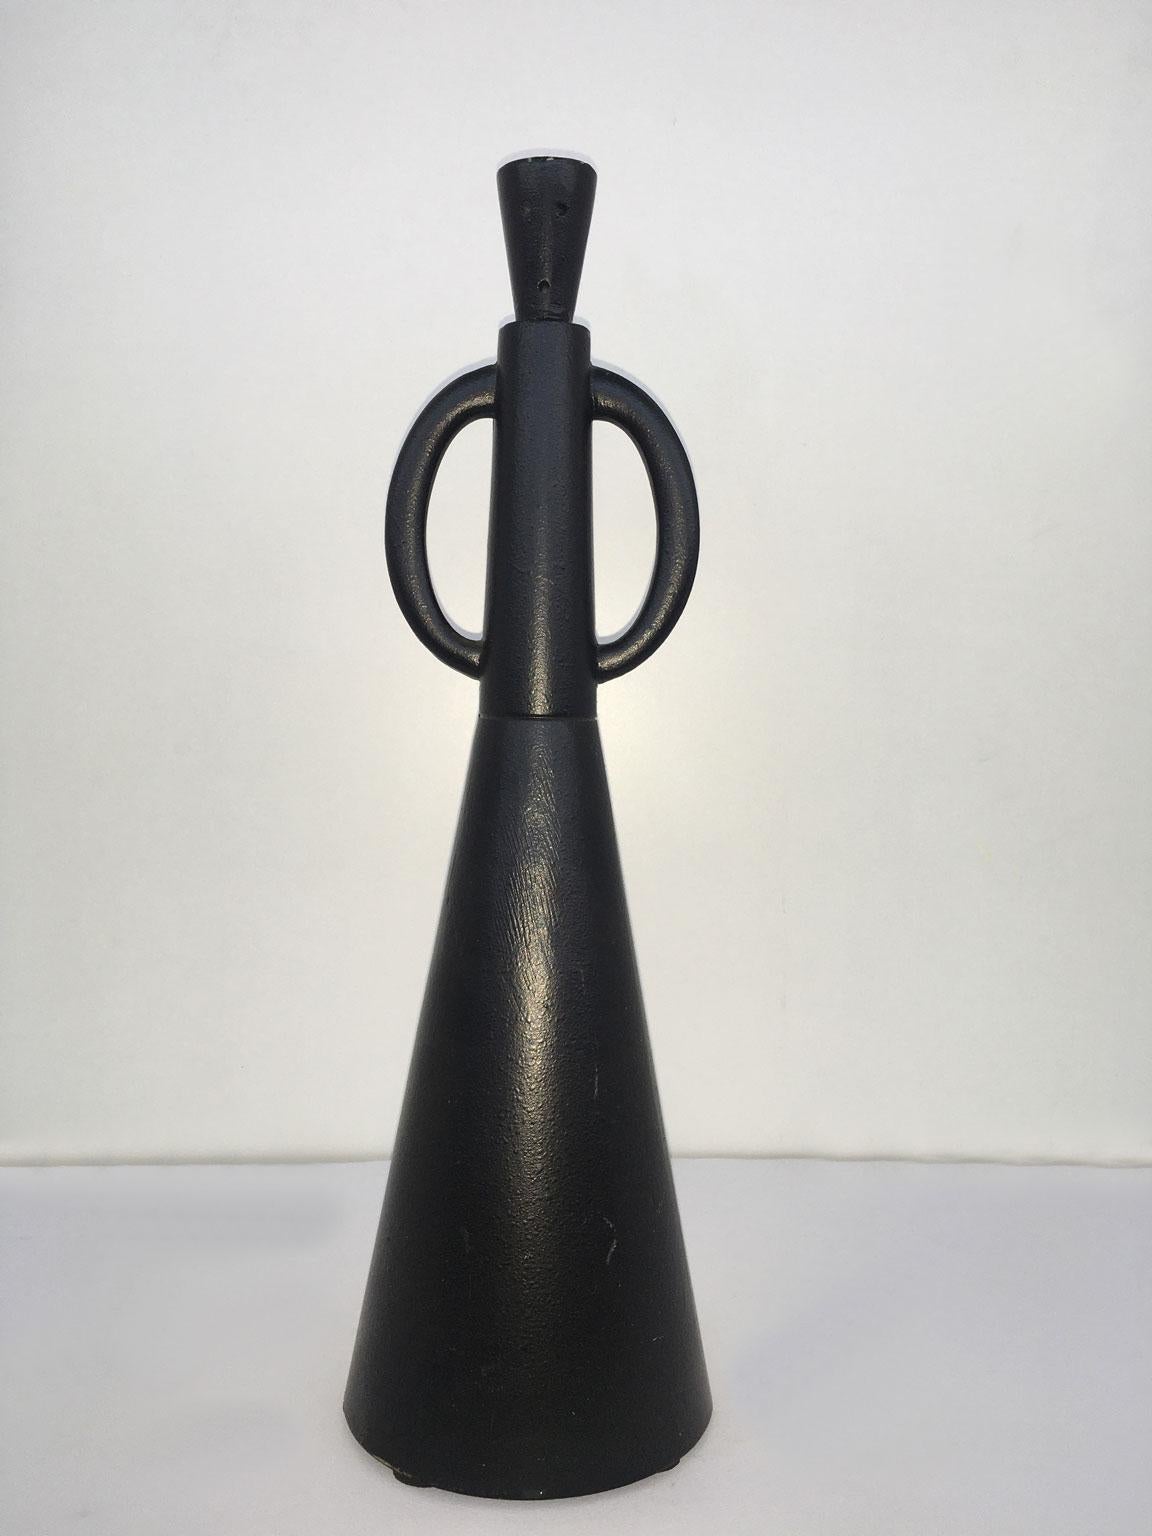 1980 Italy Post-Modern Alessandro Guerriero Abstract Sculpture Portabuono Quo For Sale 3